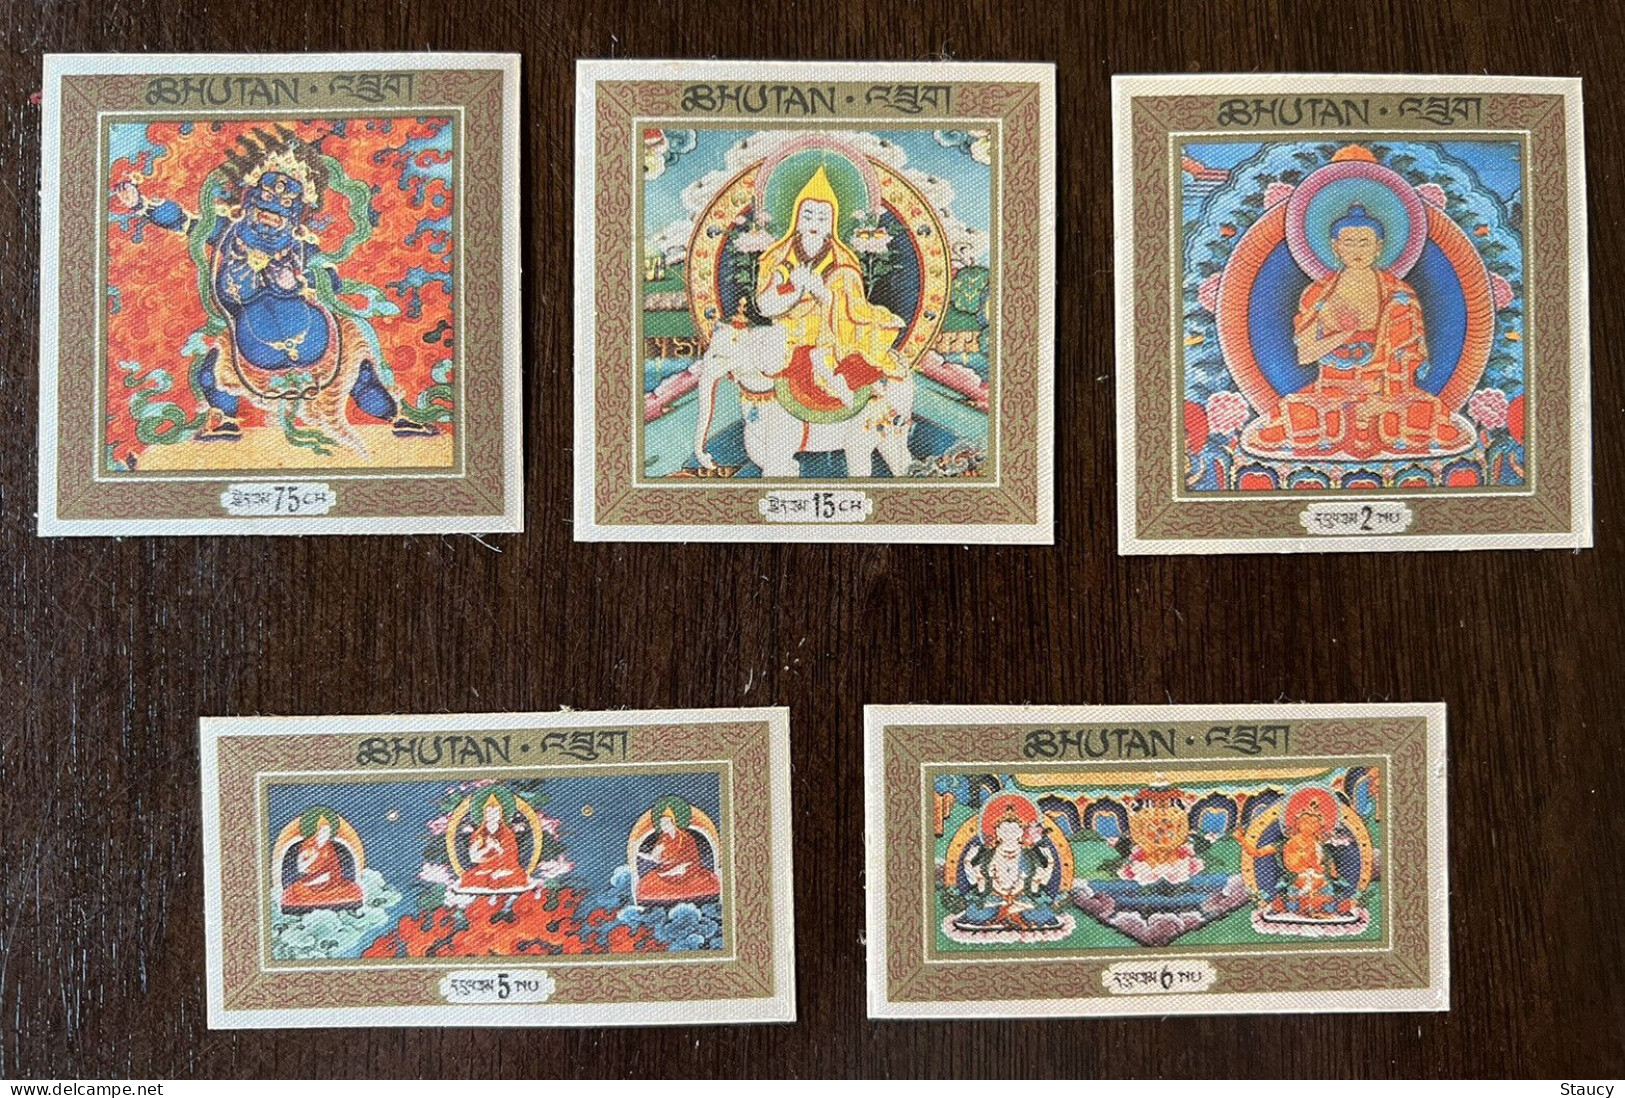 BHUTAN 1969 "Imperf" RELIGIOUS THANKA PAINTINGS BUDHA - SILK CLOTH Unique 5v Stamps SET "Imperf" MINT, As Per Scan - Buddismo